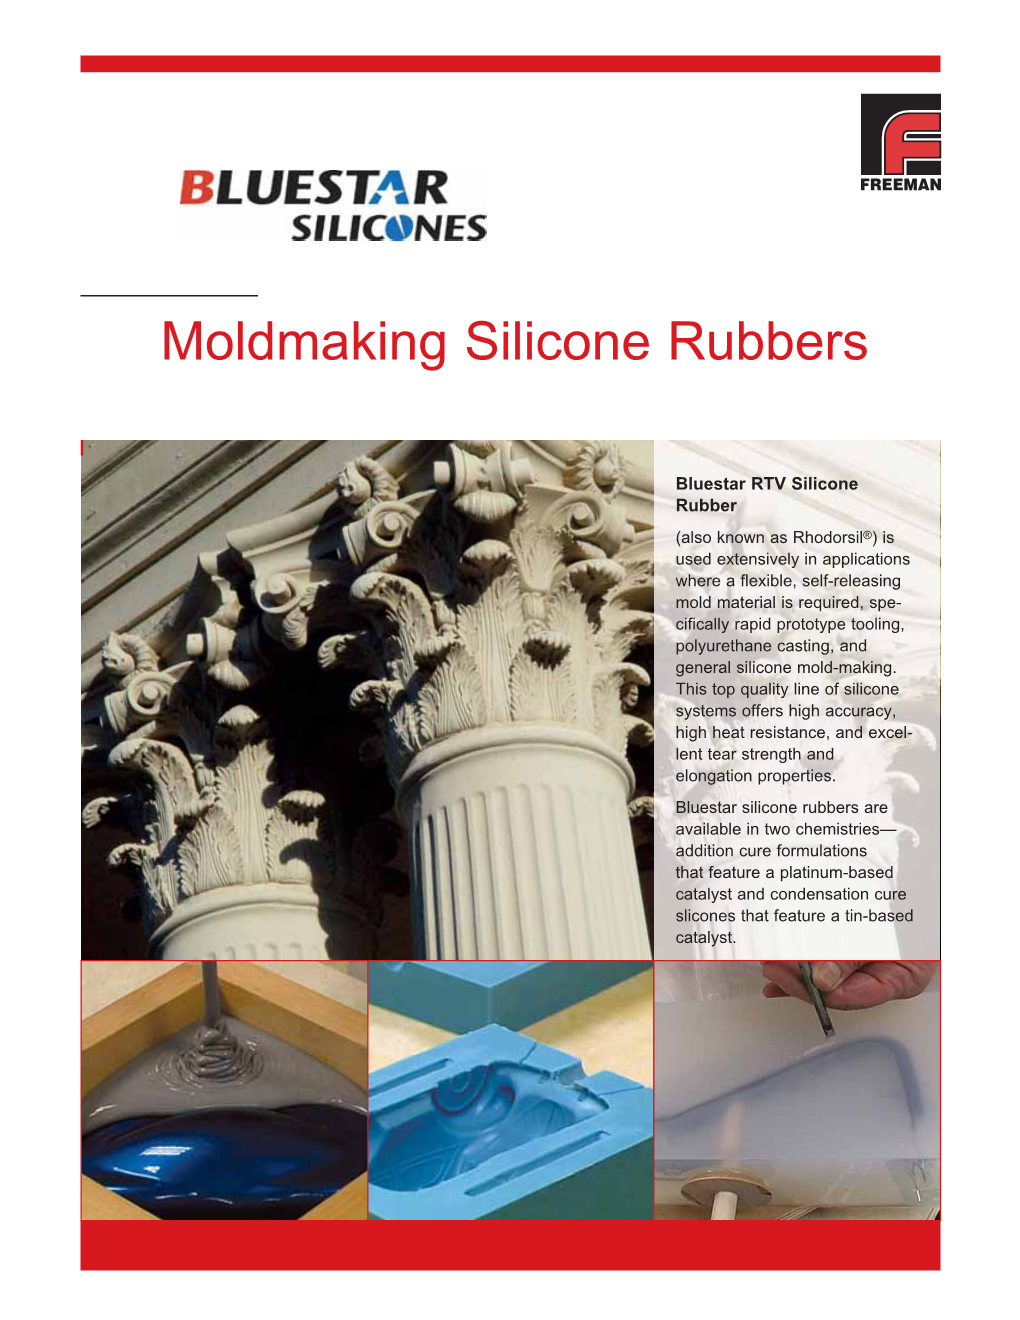 Moldmaking Silicone Rubbers